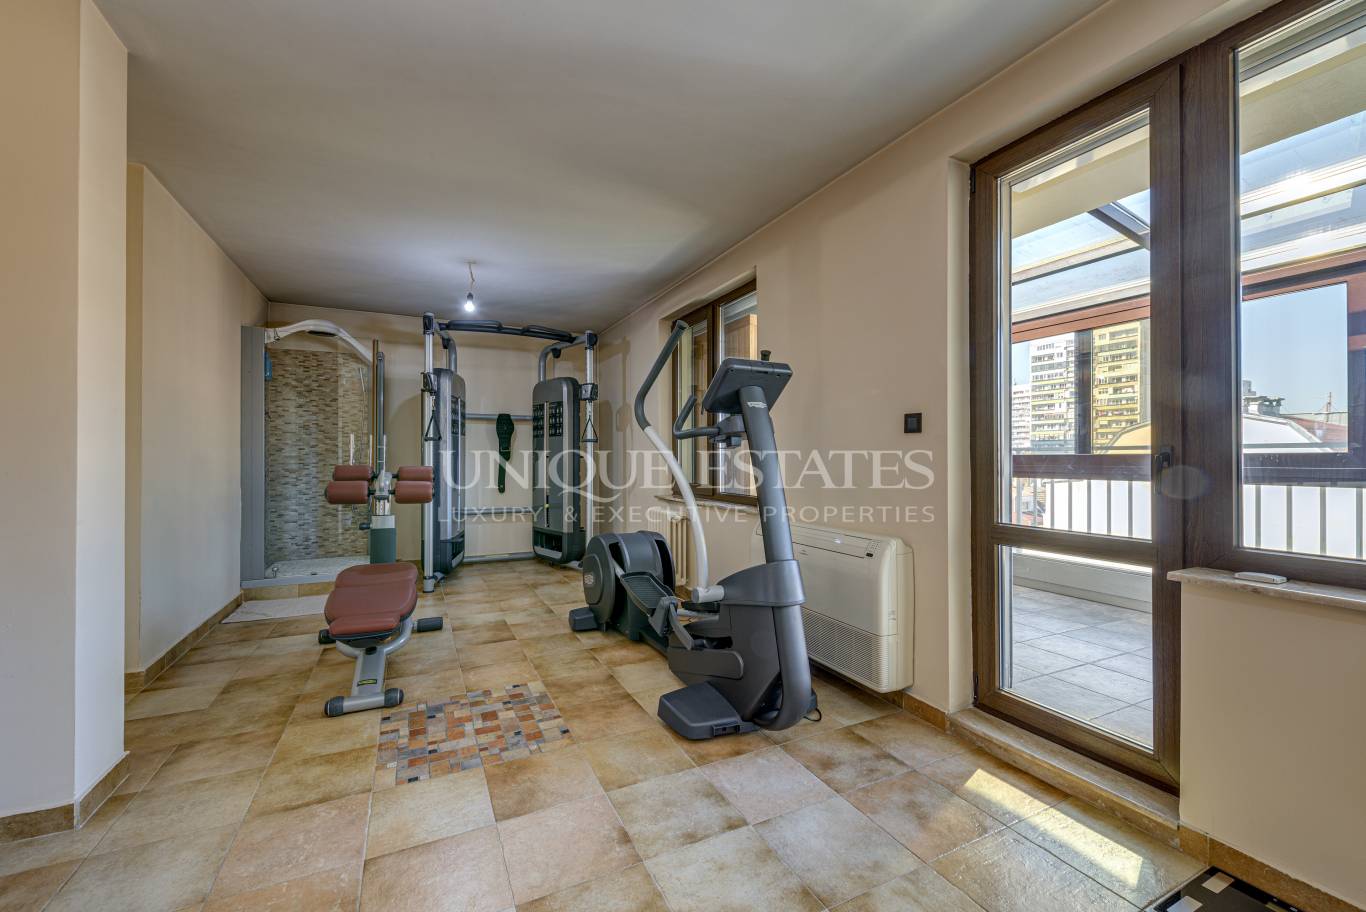 Apartment for sale in Sofia, Borovo with listing ID: K16114 - image 8